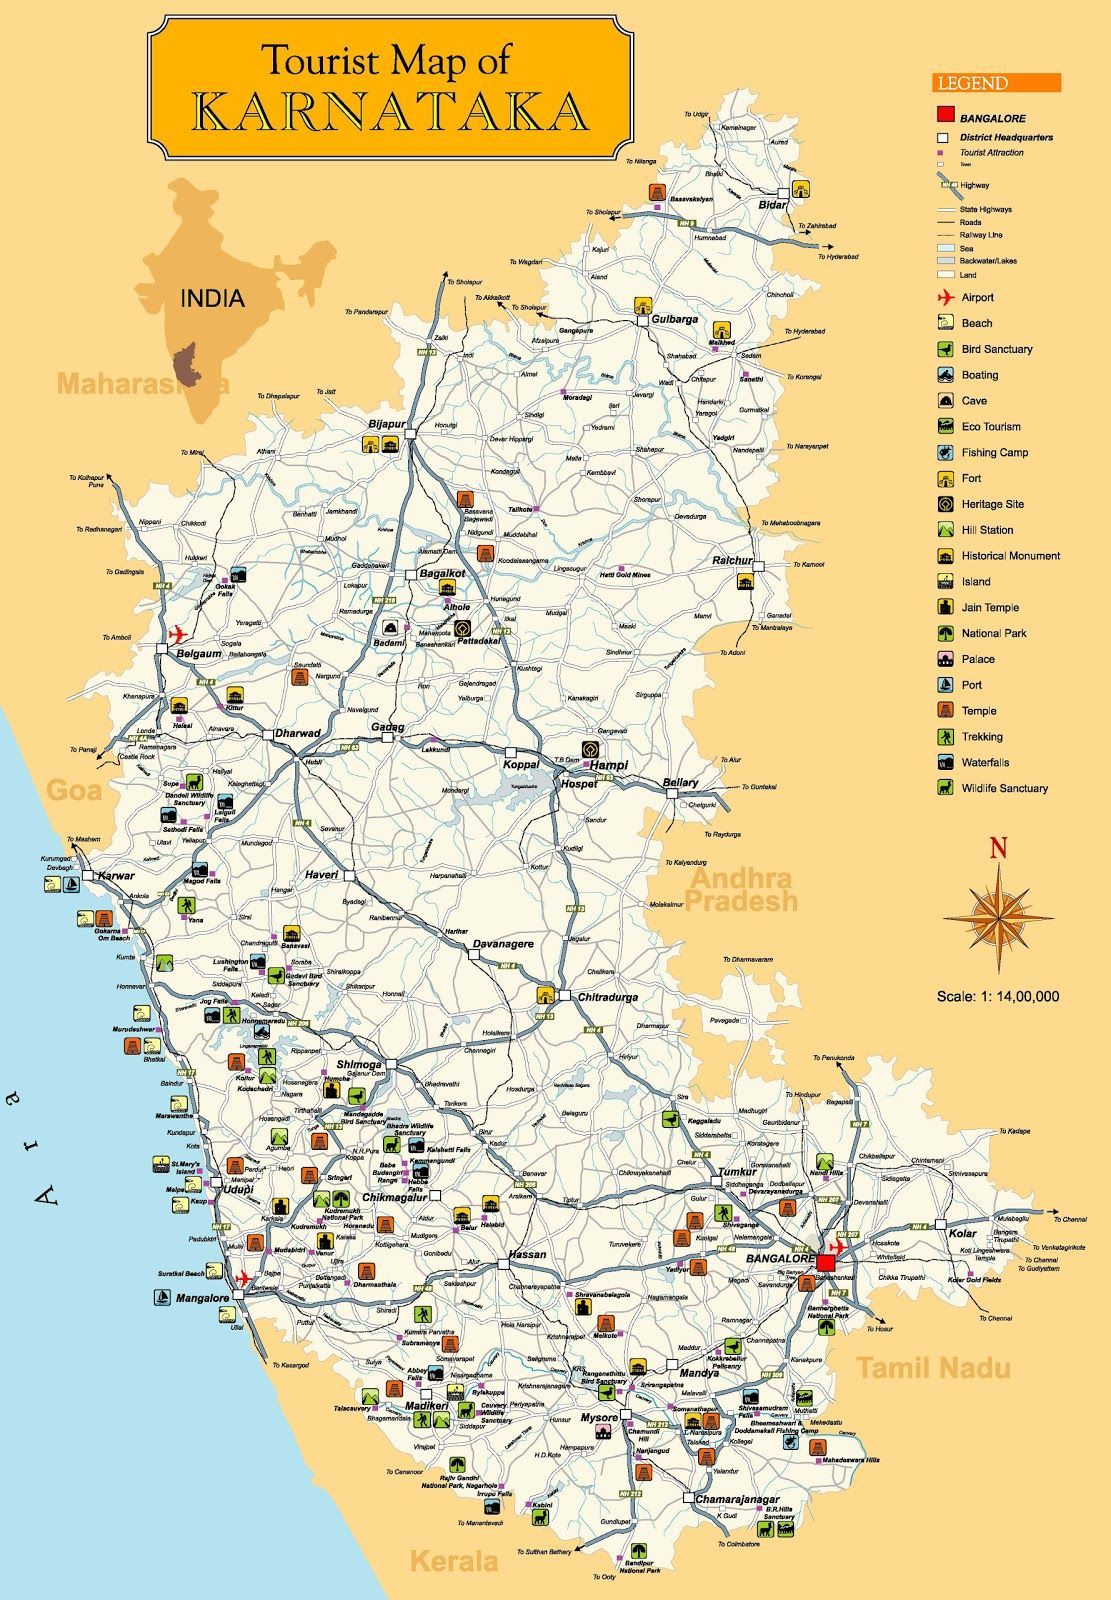 Excellent Tourist Map of Karnataka State, South India (the capital of which is Bangalore / Bengaluru). Tourist map, India map, Karnataka